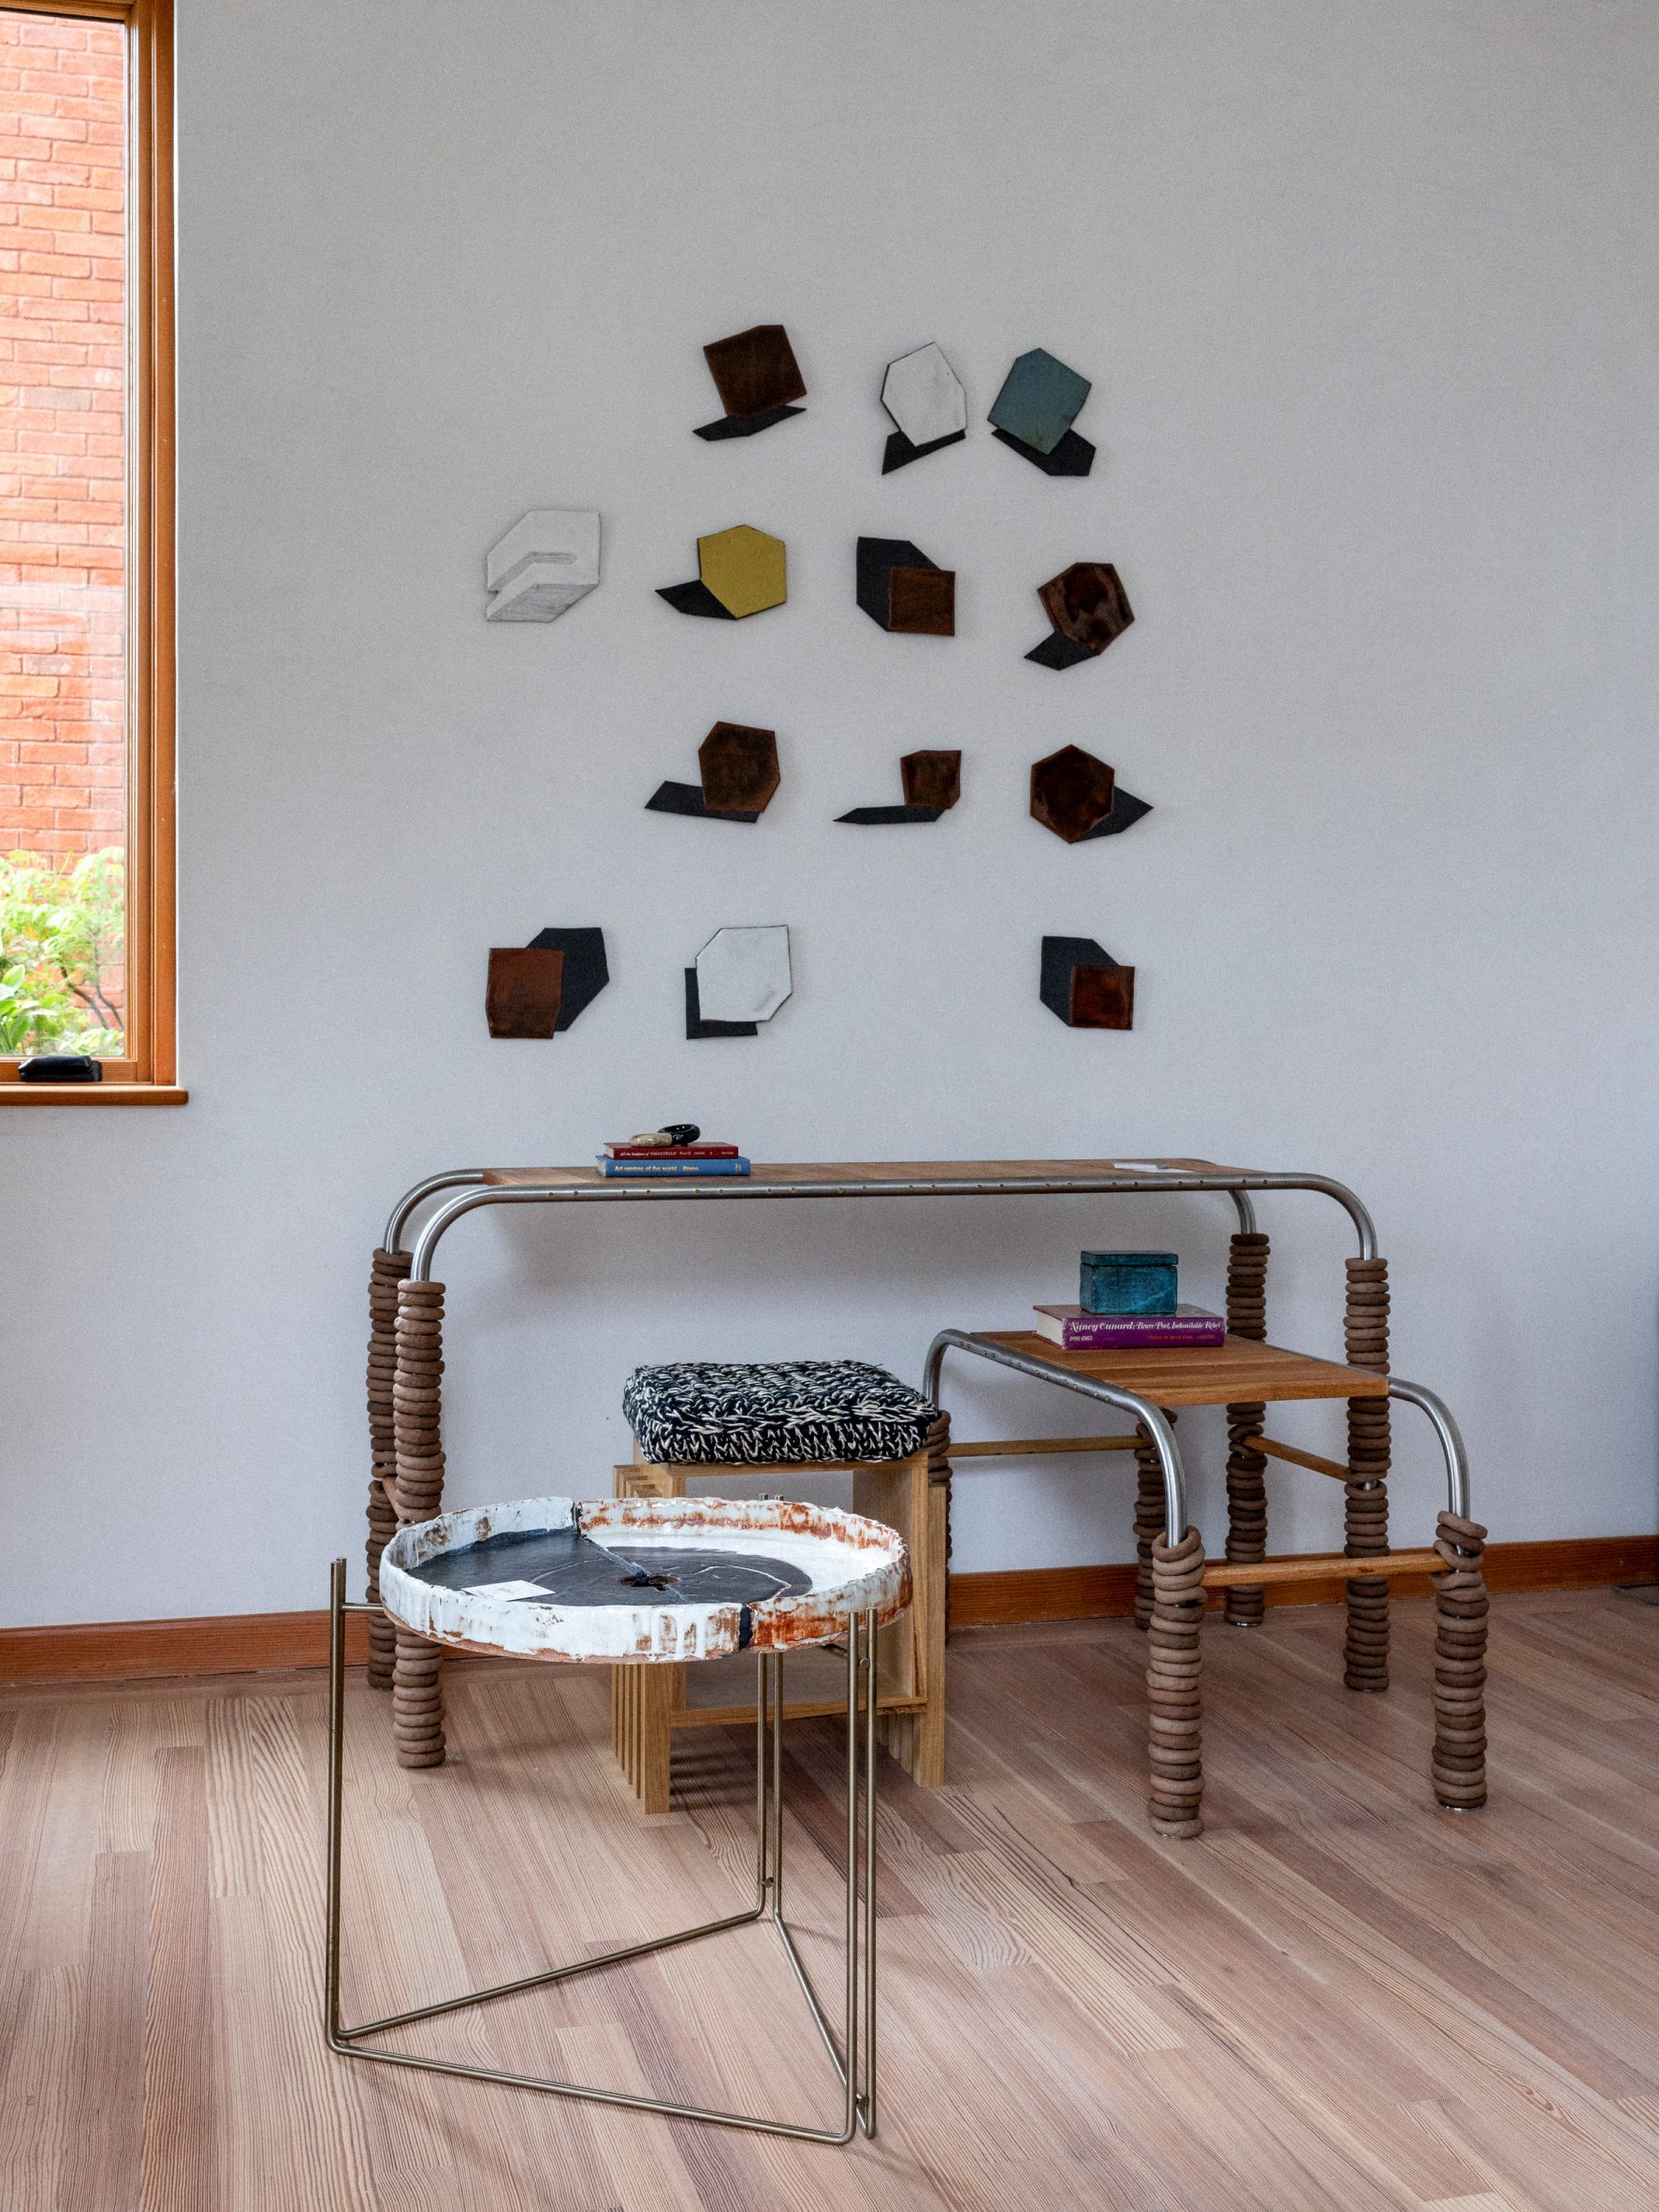 Tables and chairs in front of wall hanging